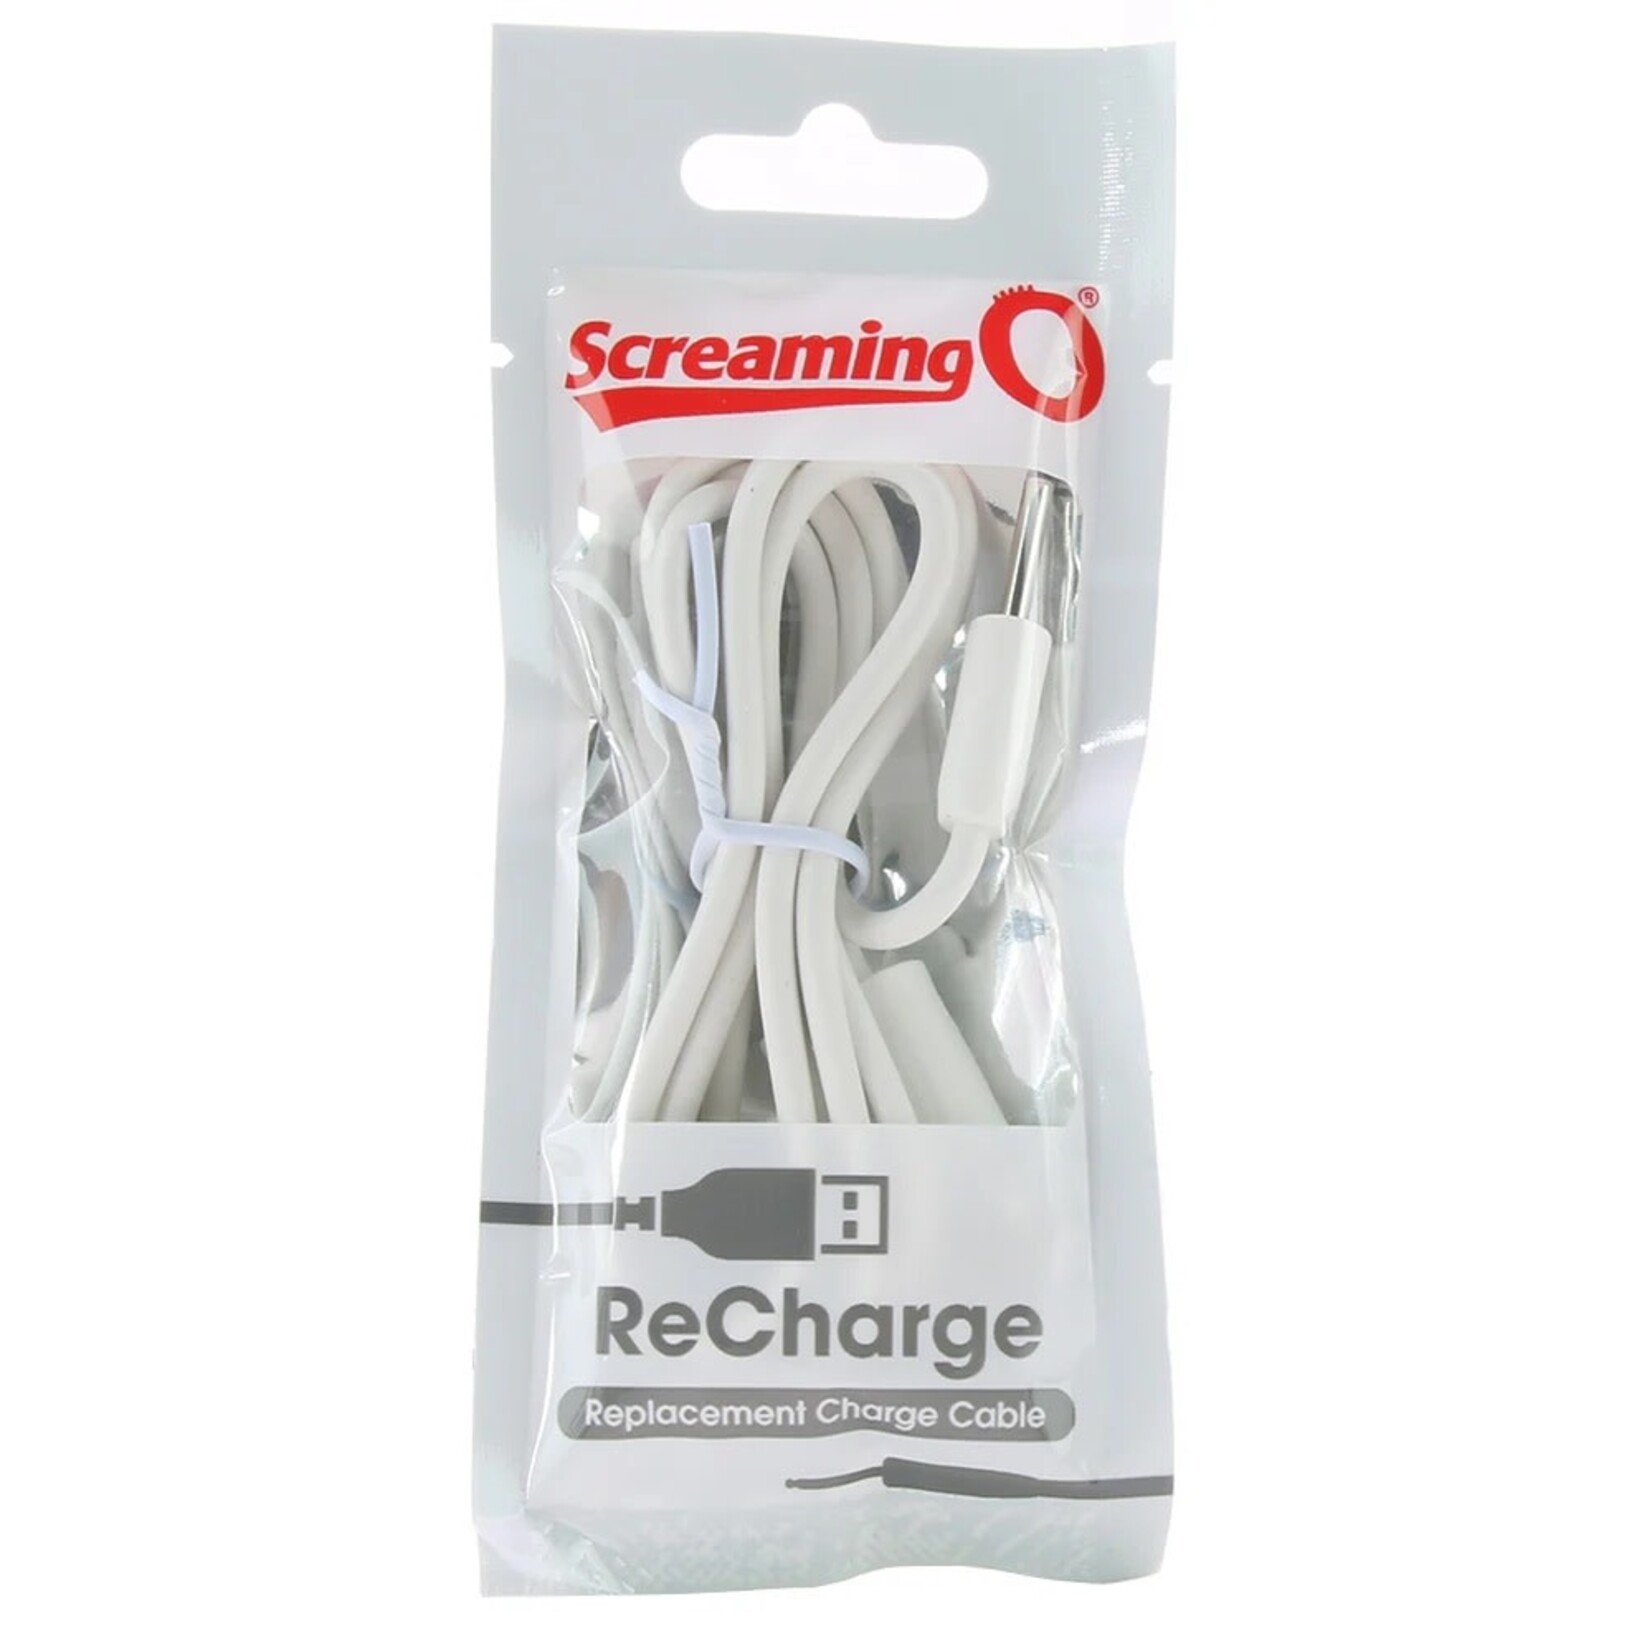 SCREAMING O RECHARGE CHARGING CABLE